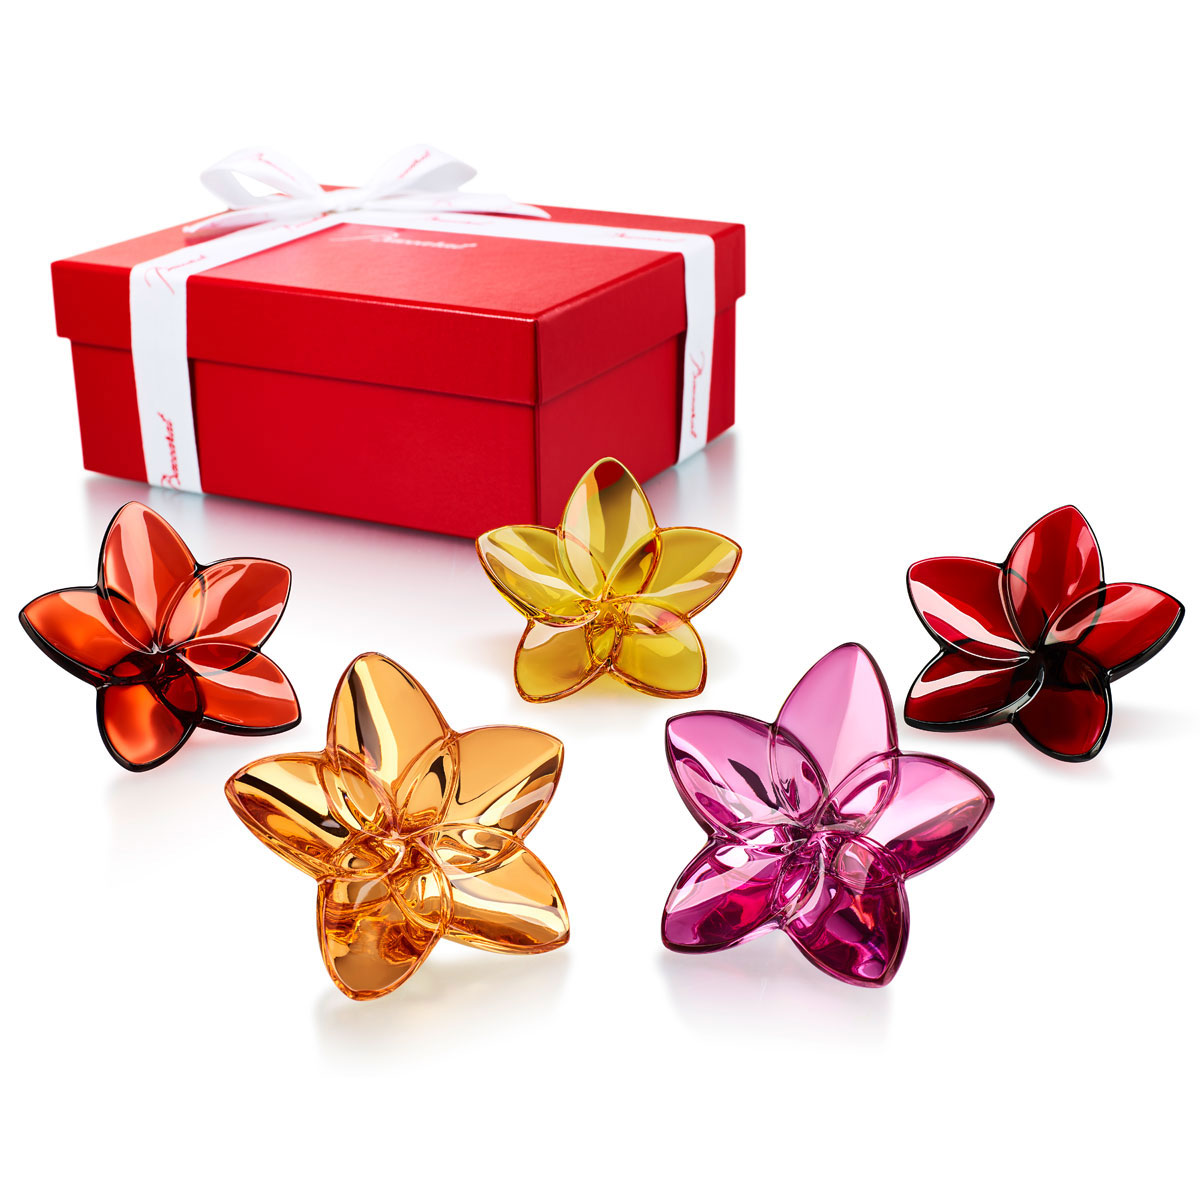 Baccarat The Bloom Collection Flower Power Boxed Set of Five